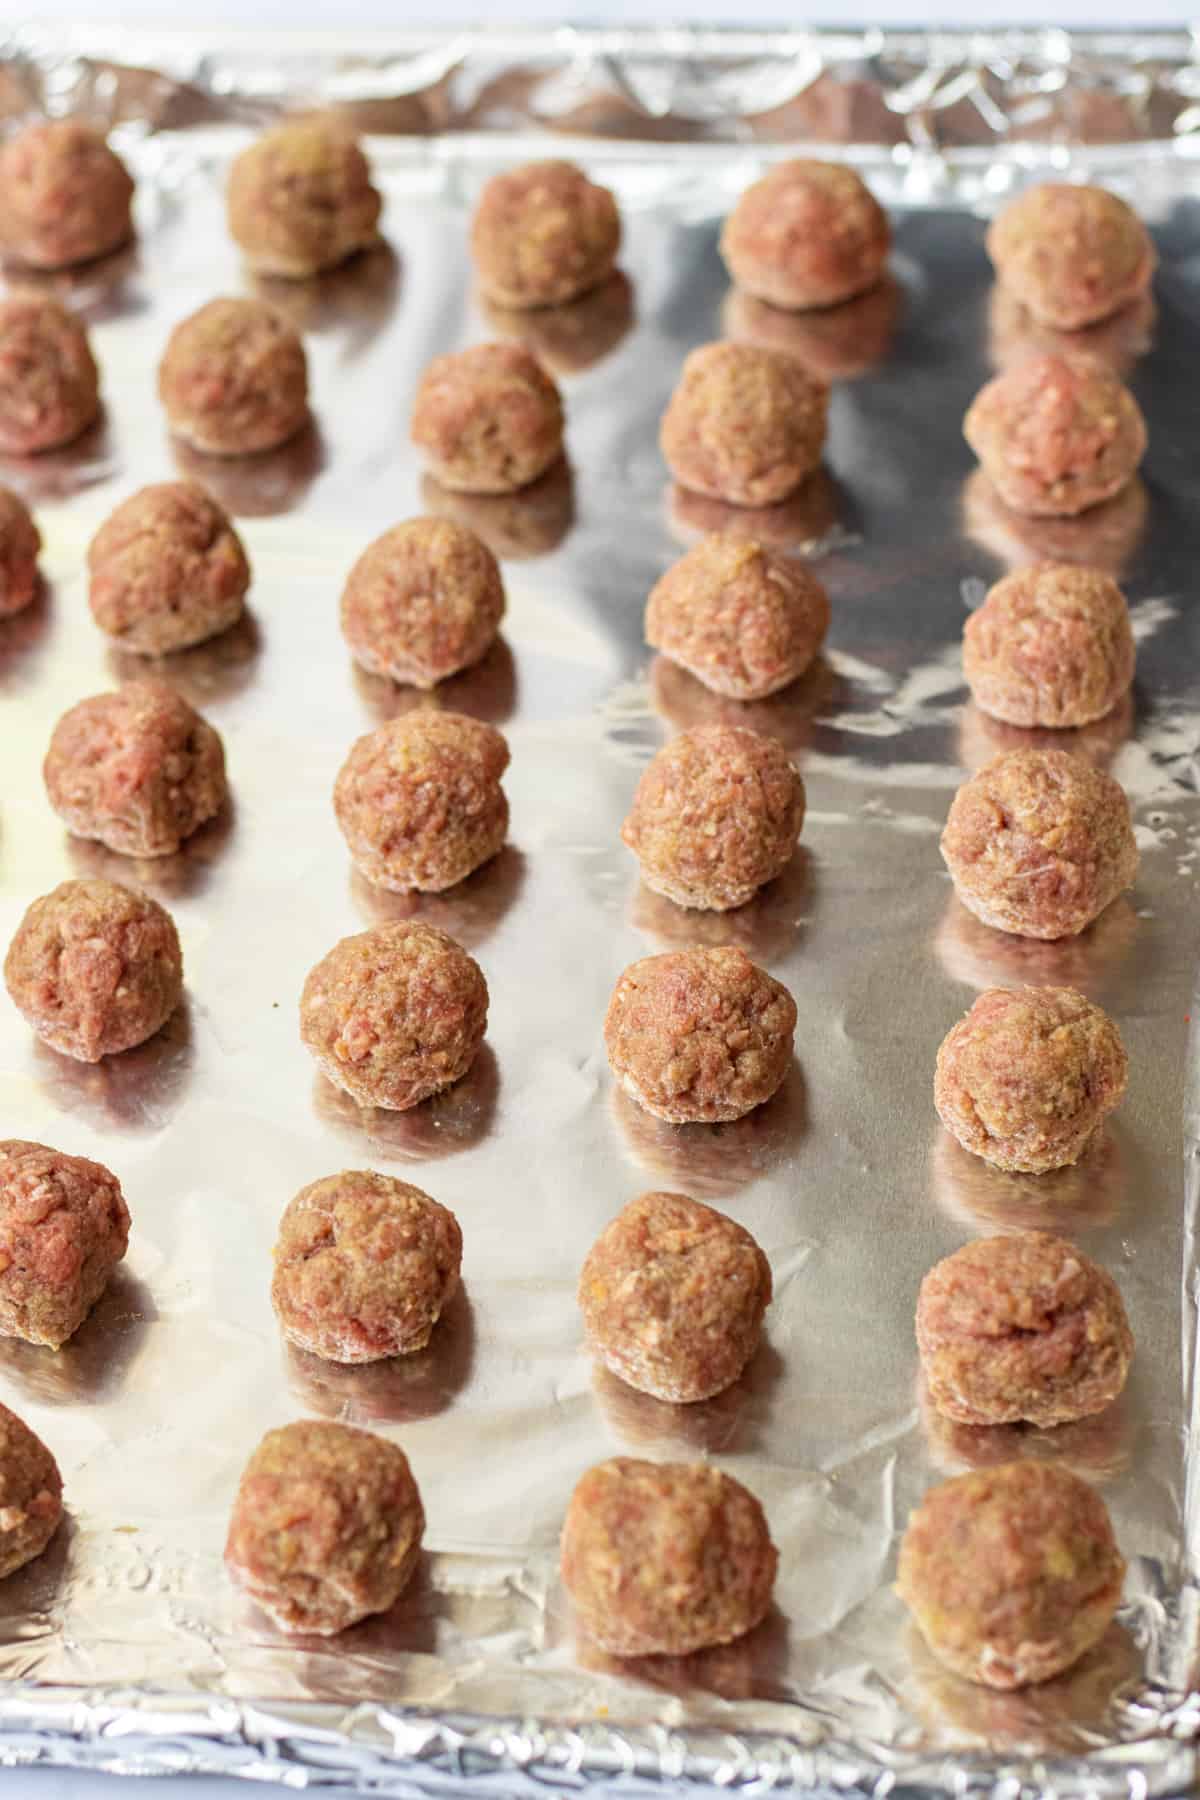 Unbaked meatballs on a foil-lined baking sheet.